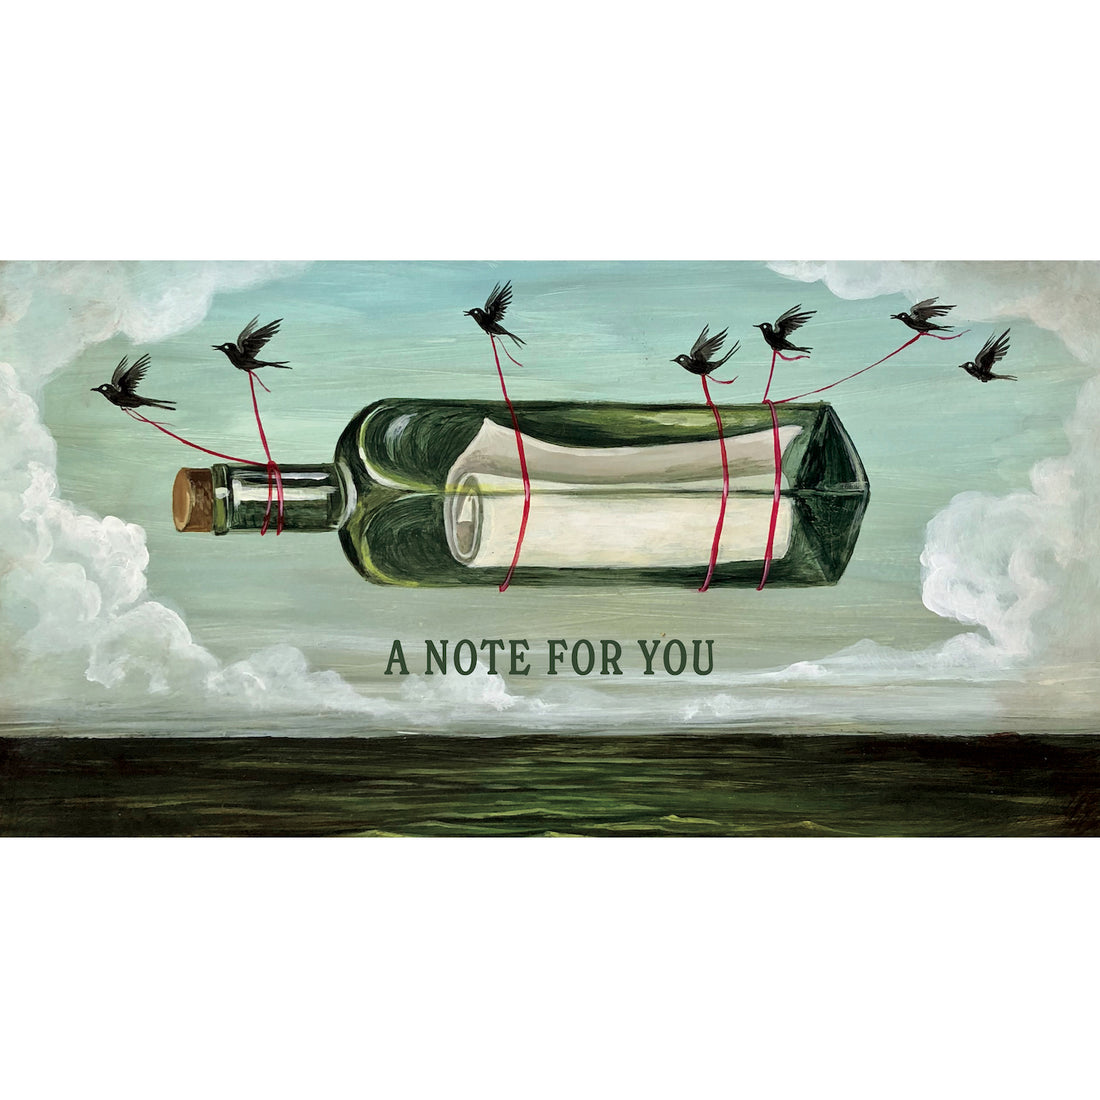 A whimsical illustration of a rolled up message in a green glass bottle, being carried over the ocean through a cloudy teal sky by a group of black birds holding the bottle by red threads. 